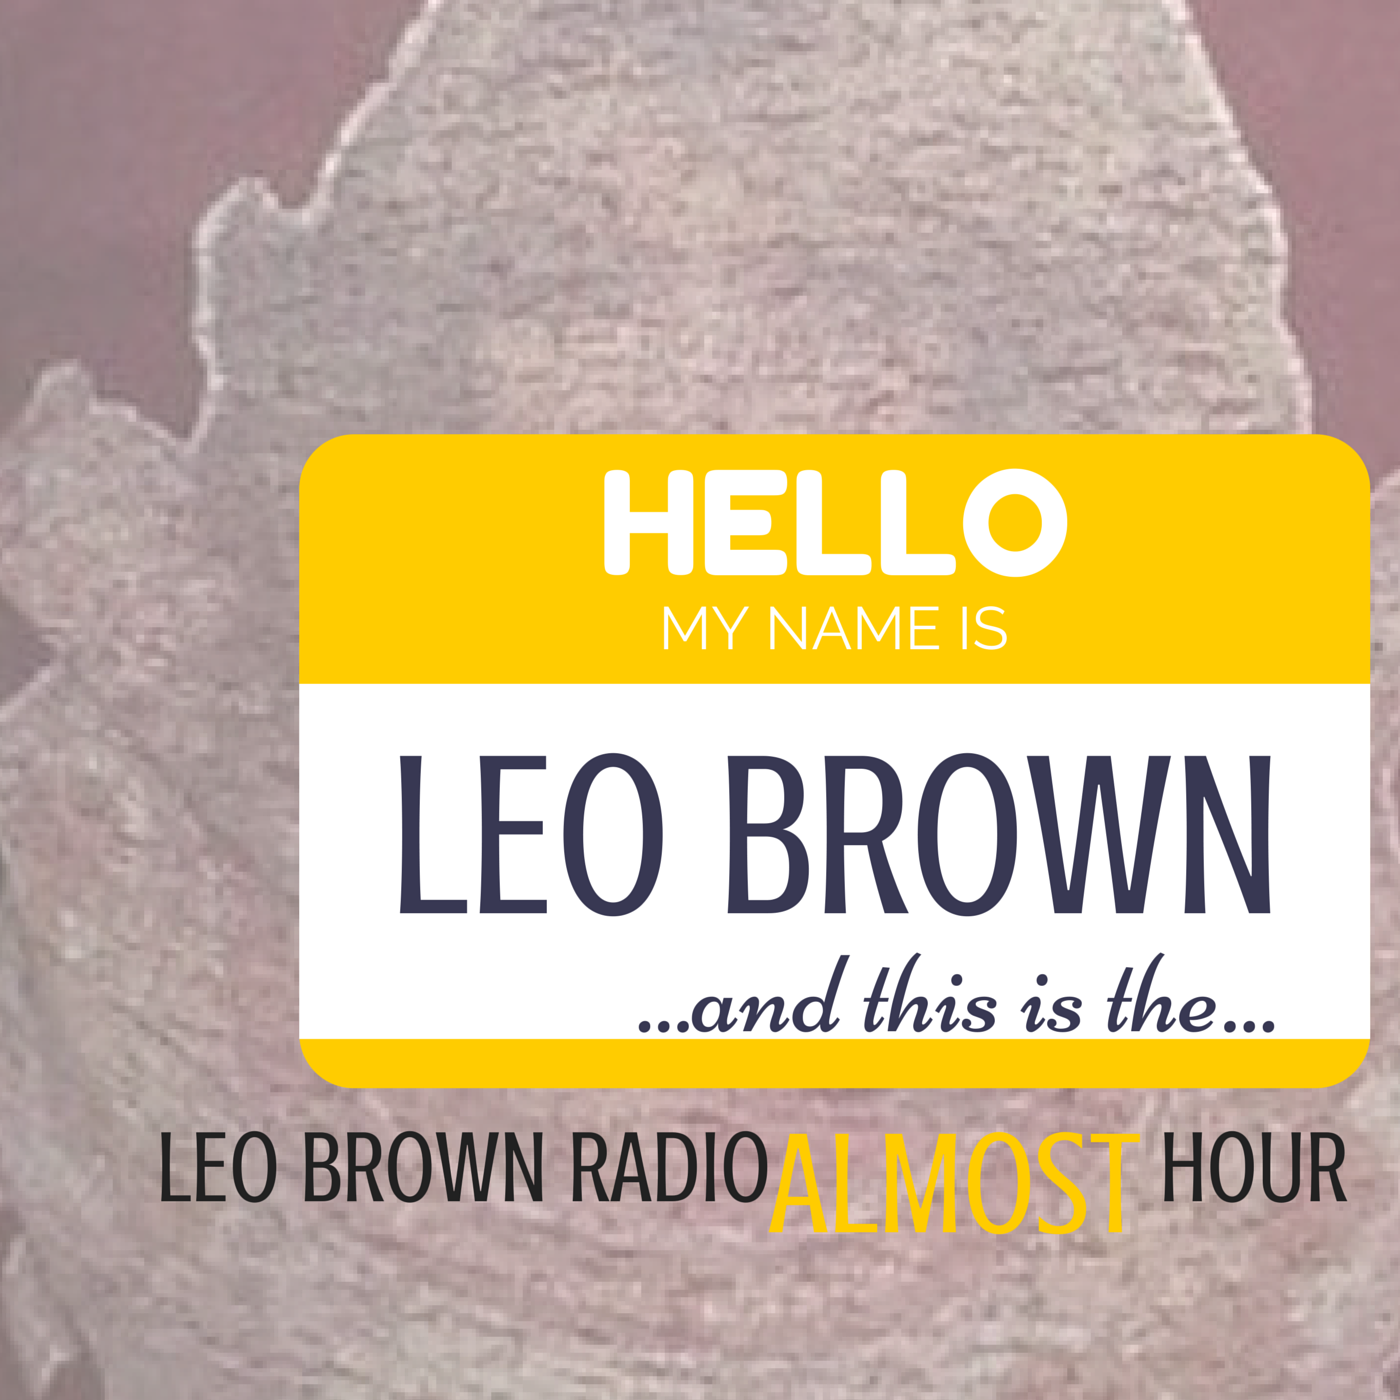 Leo Brown Almost Hour 3/23/17